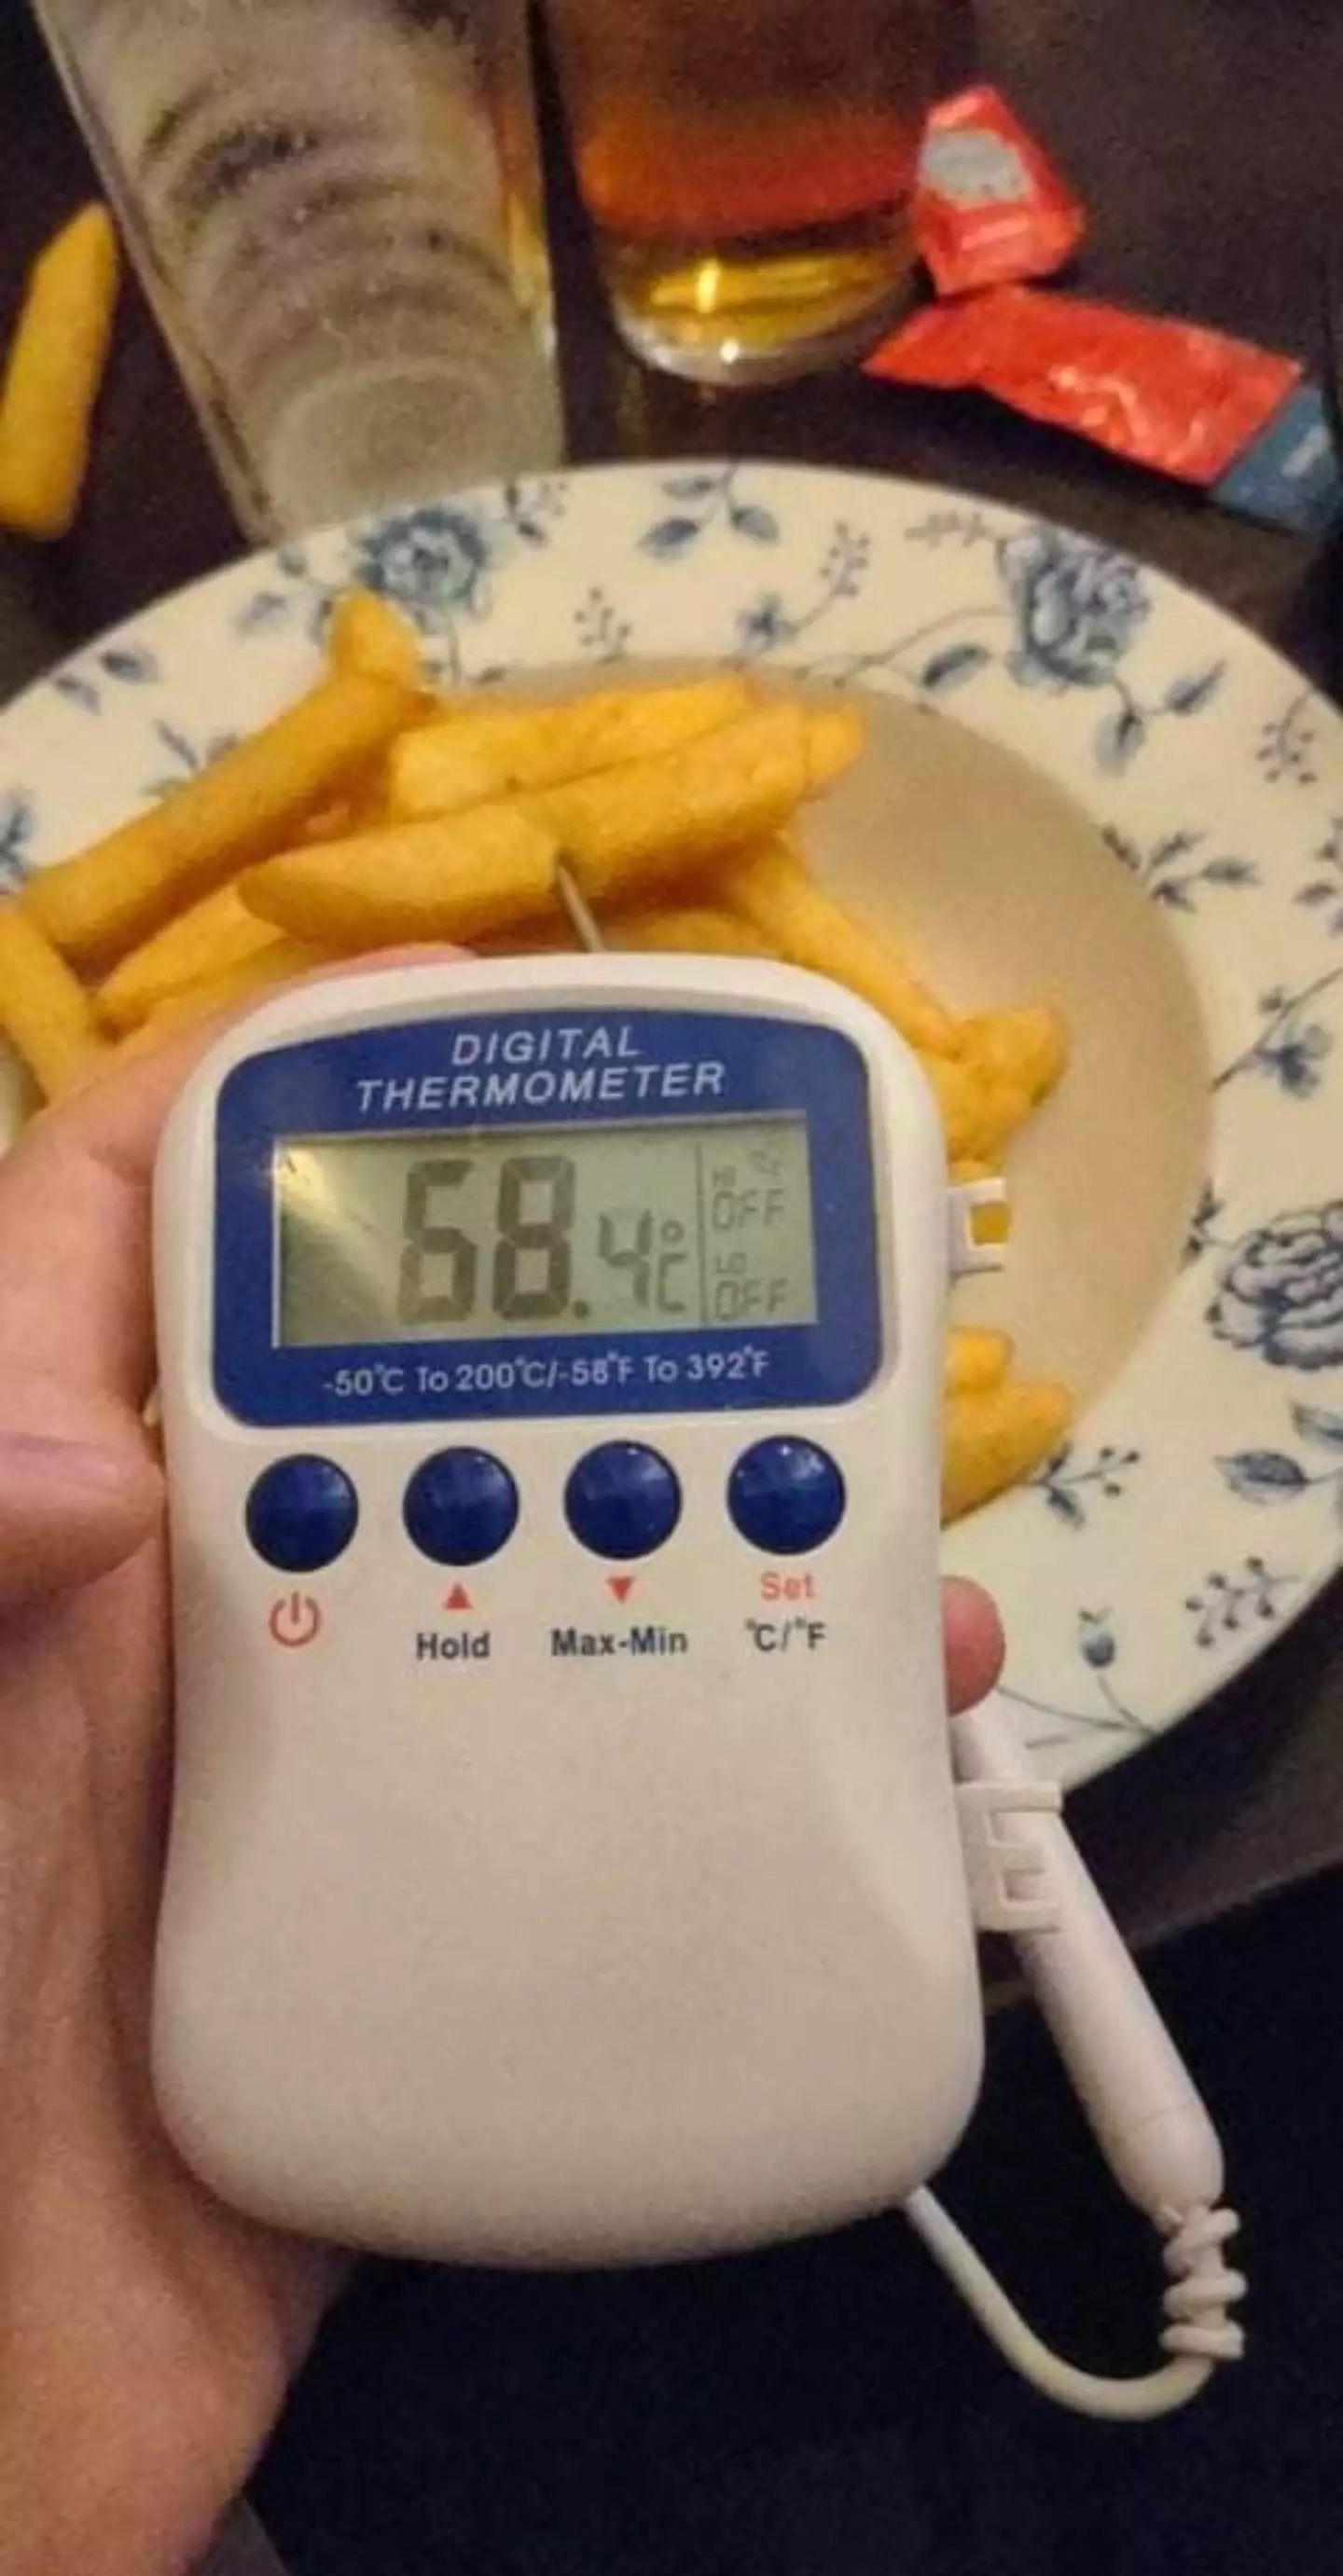 He took the temperature of each chip (